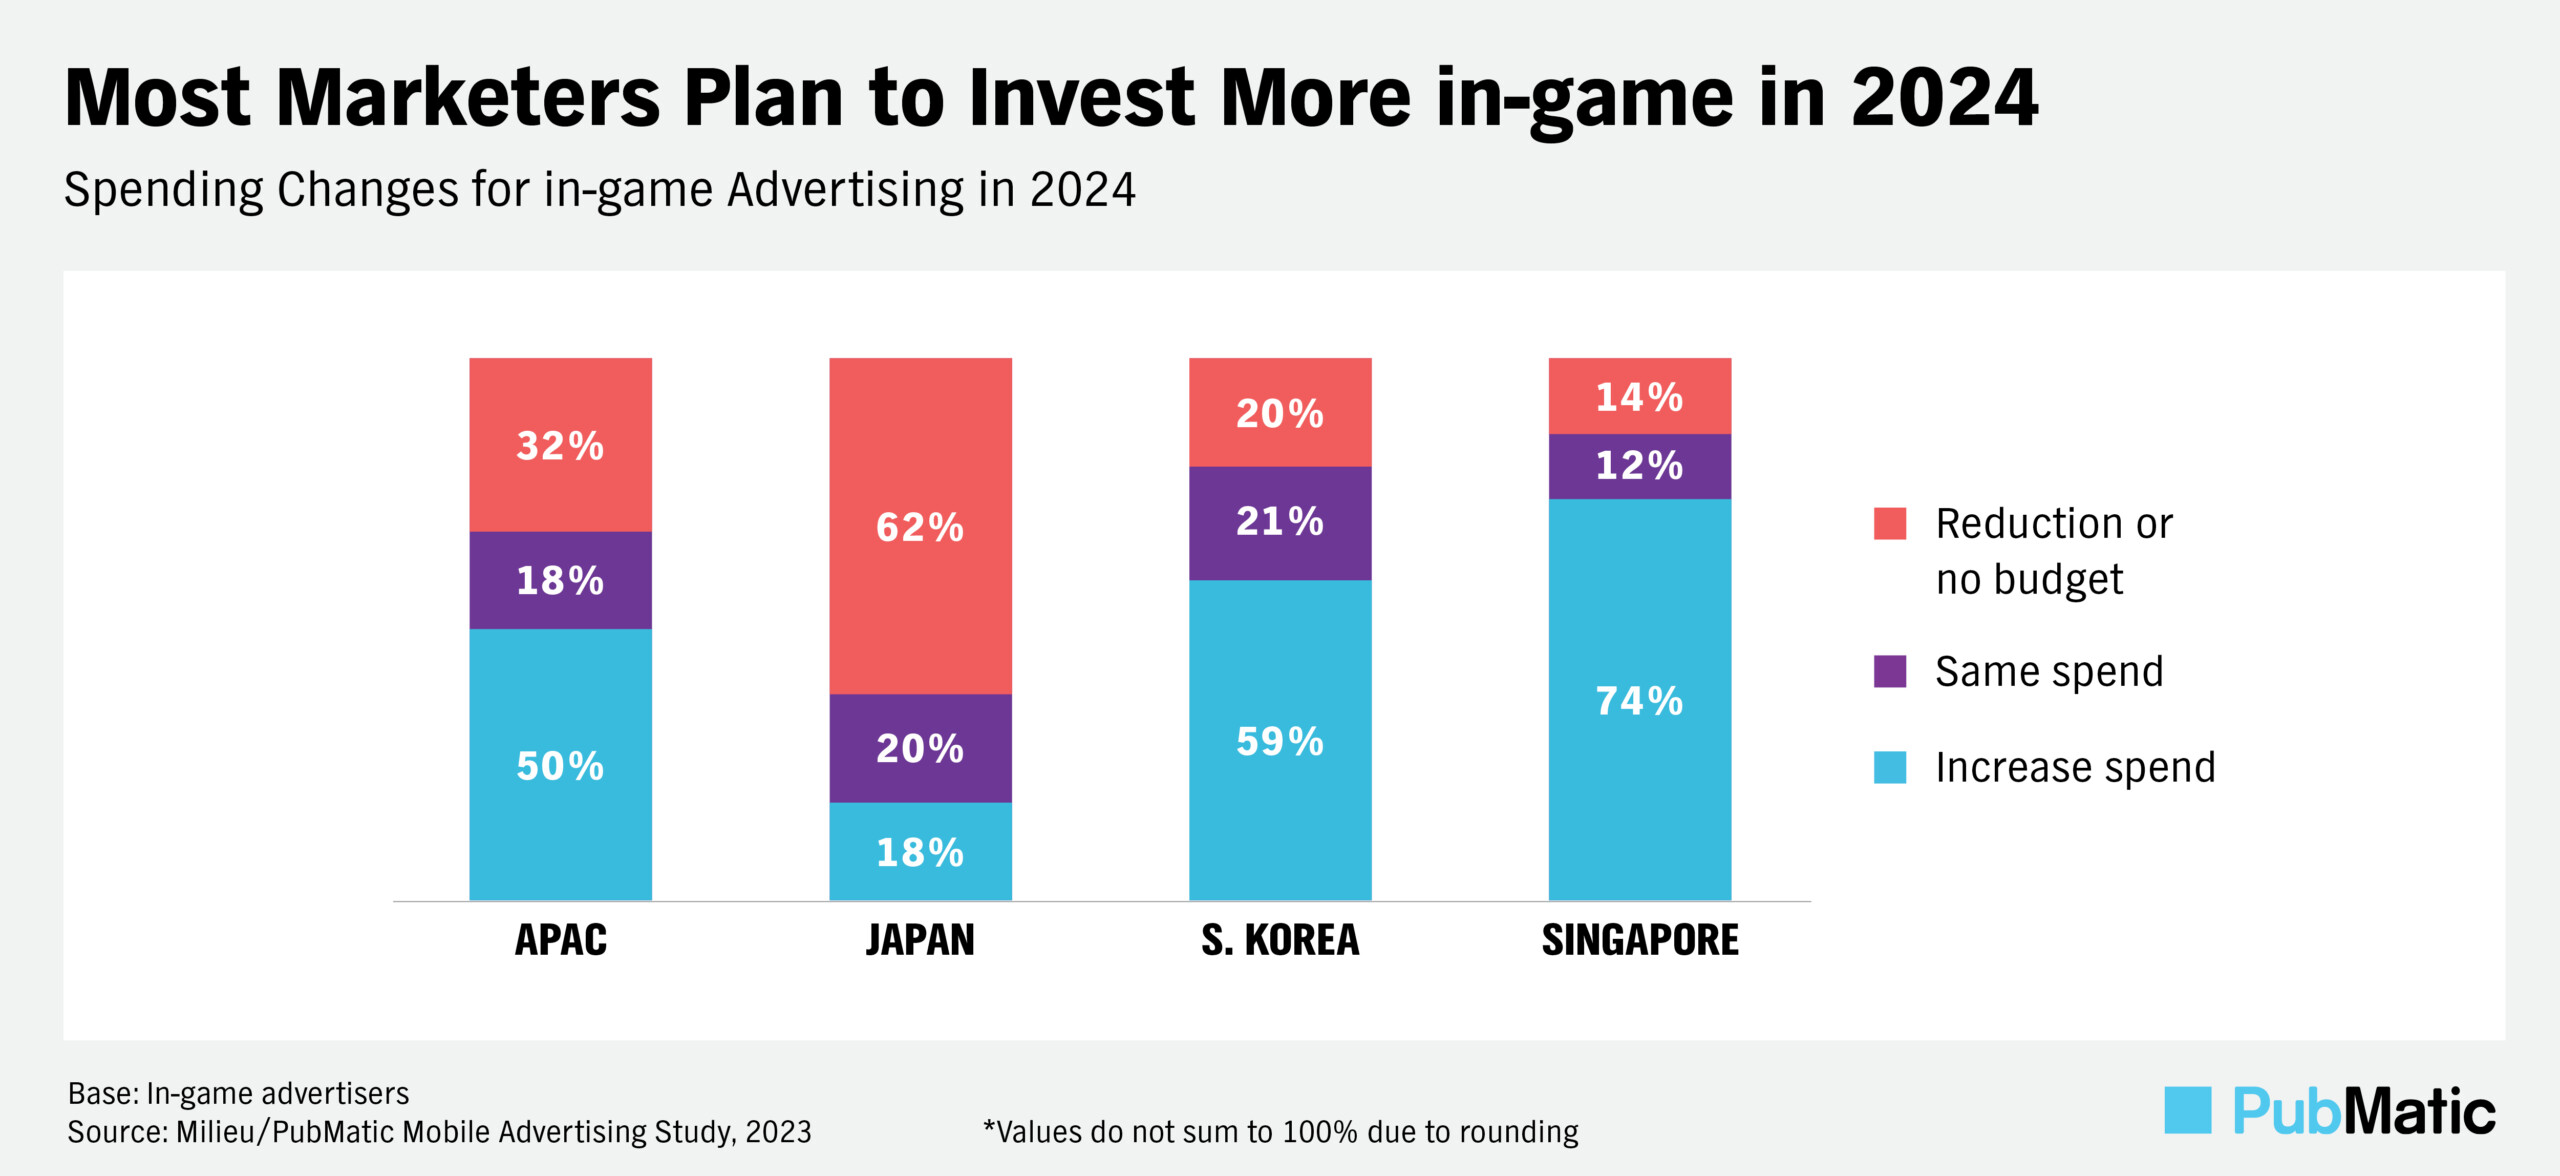 Chart showing spending changes for in-game advertising in 2024